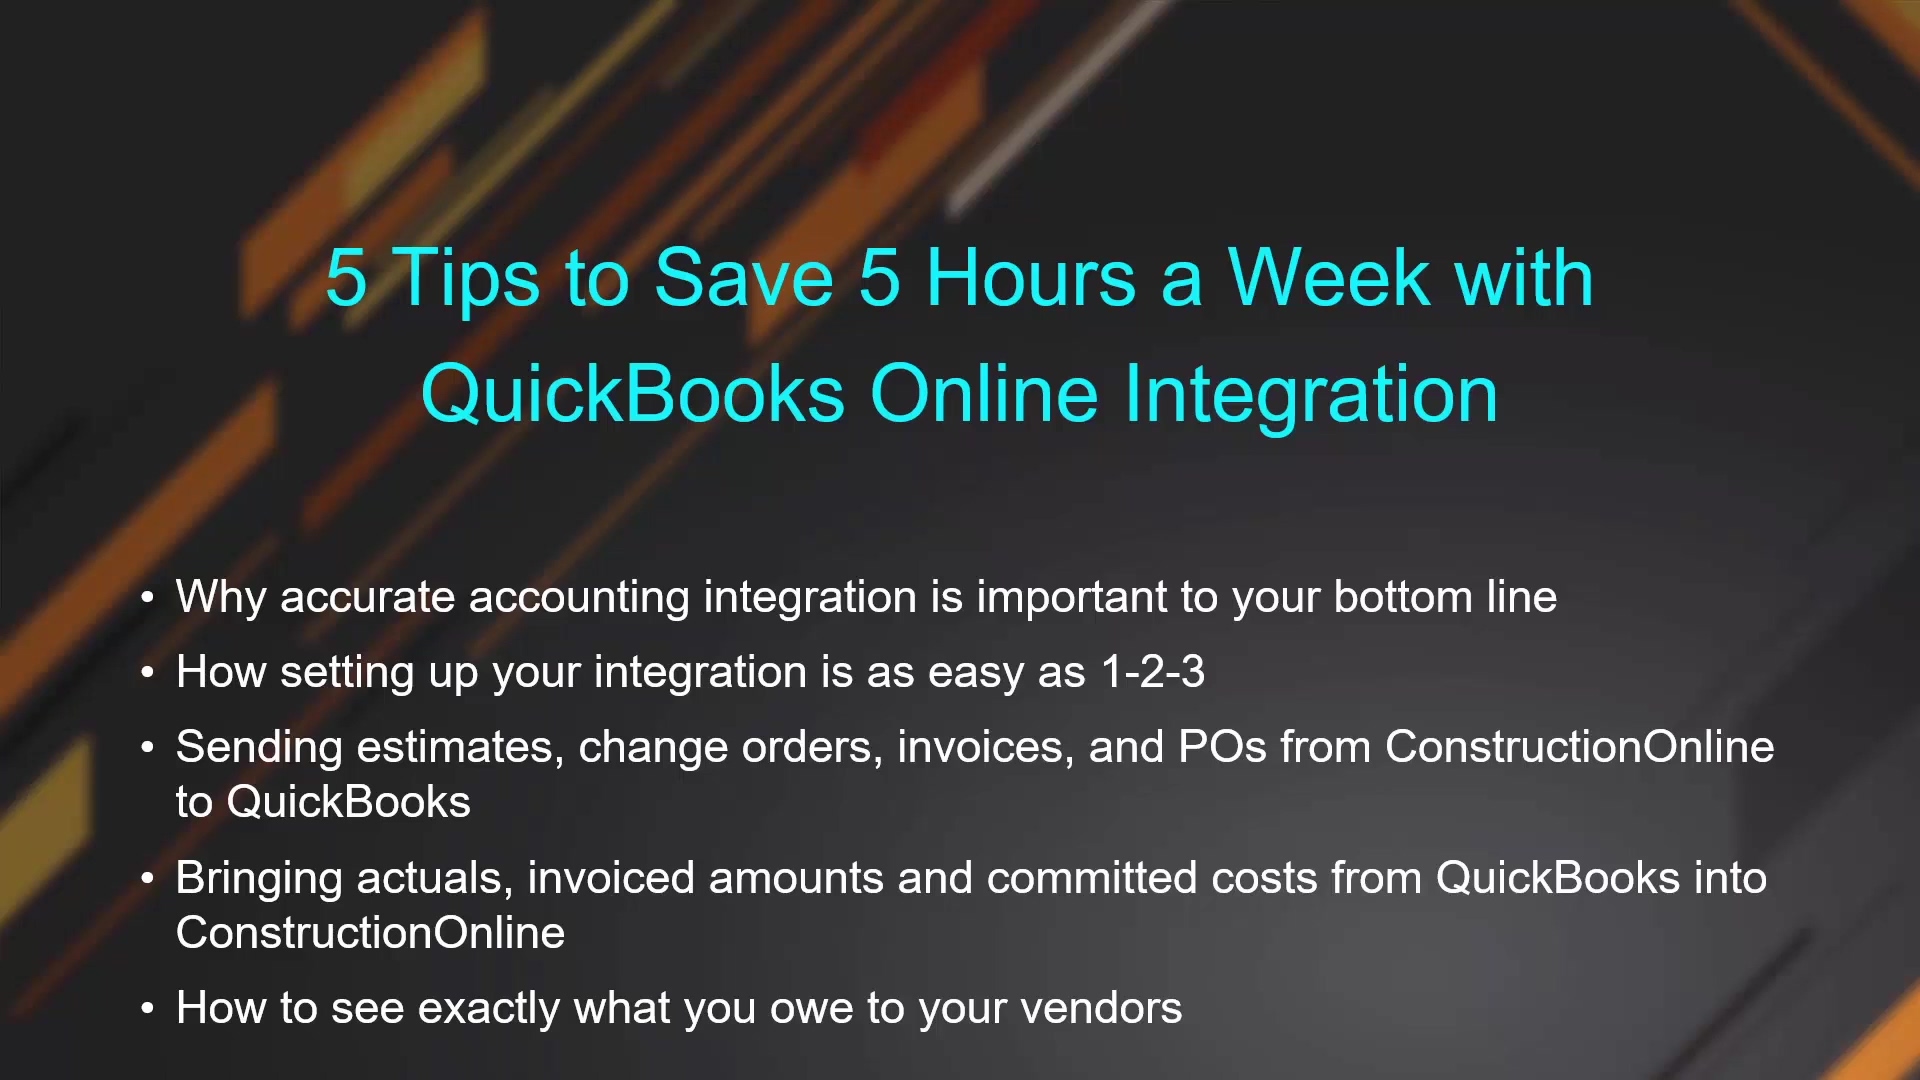 5 Tips to Save 5 Hours a Week with QuickBooks Online Integration_2